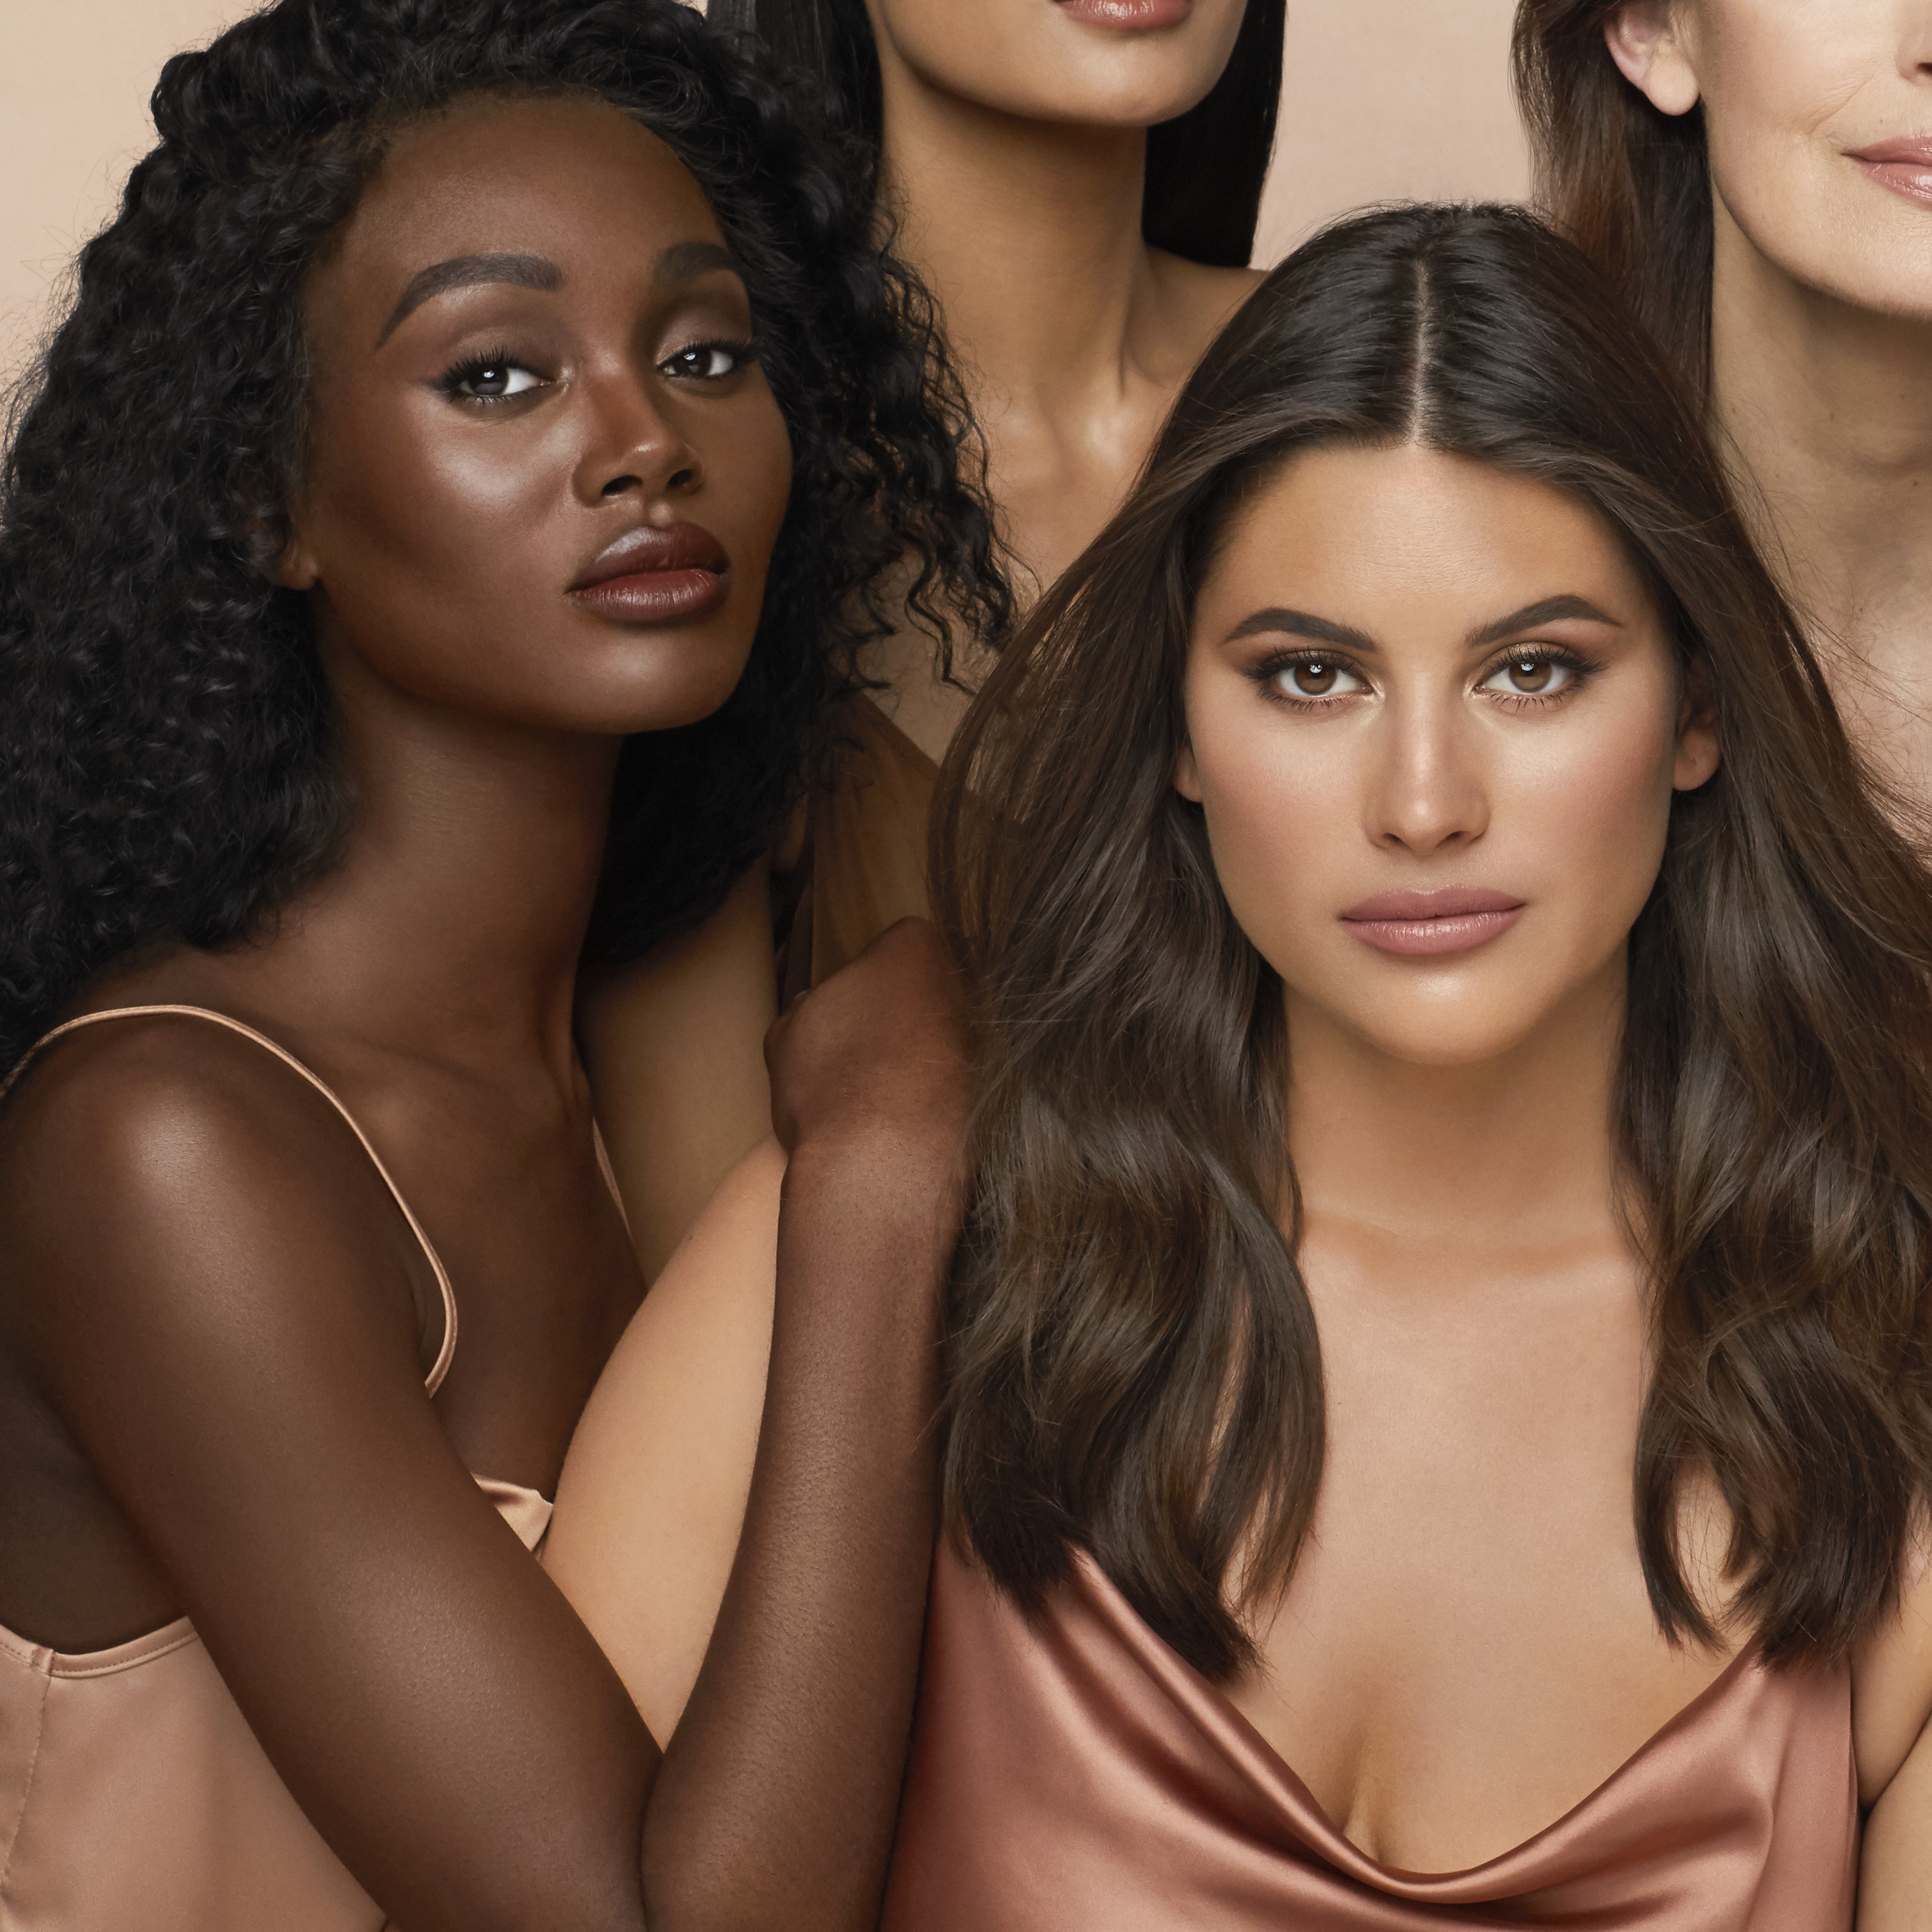 Medium and deep-tone models with flawless smooth skin and wearing nude pink lipstick with subtle, glowy blush, and smokey eye makeup.